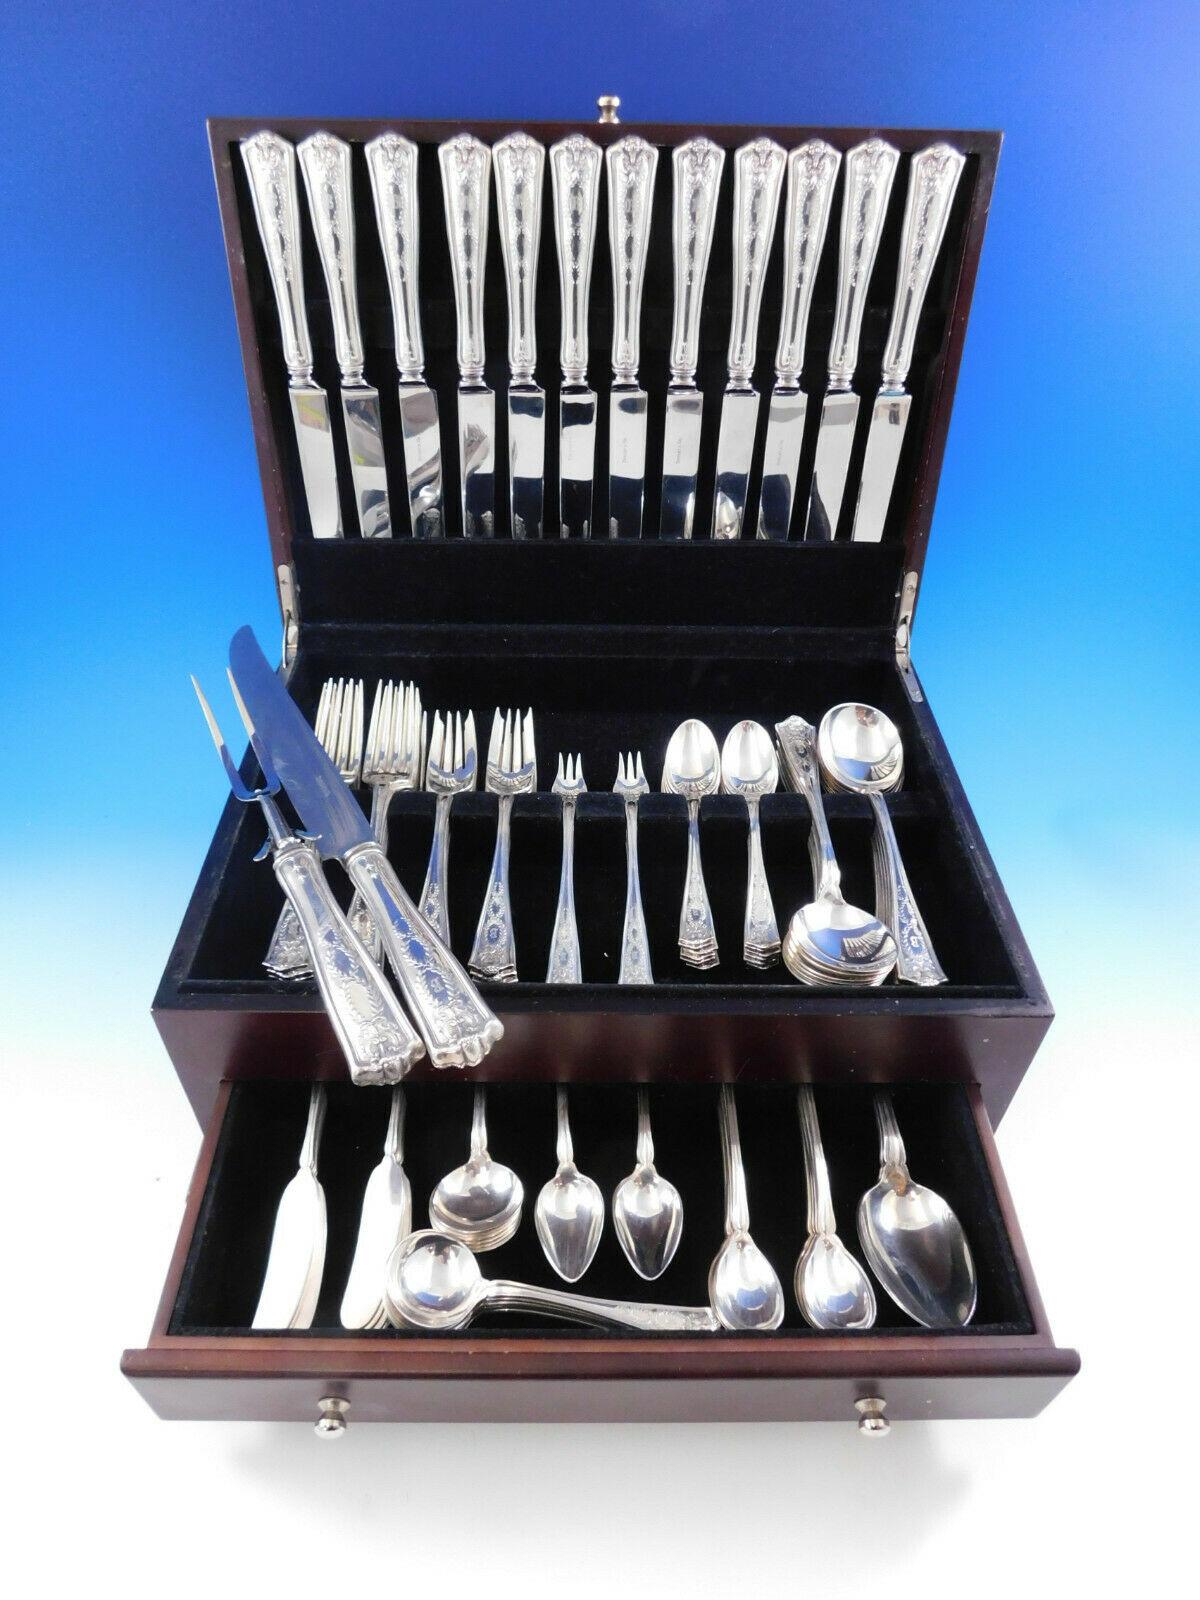 Monumental dinner size Winthrop by Tiffany & Co. Sterling silver flatware set - 125 pieces. This set includes: 

12 dinner size knives, 10 1/4